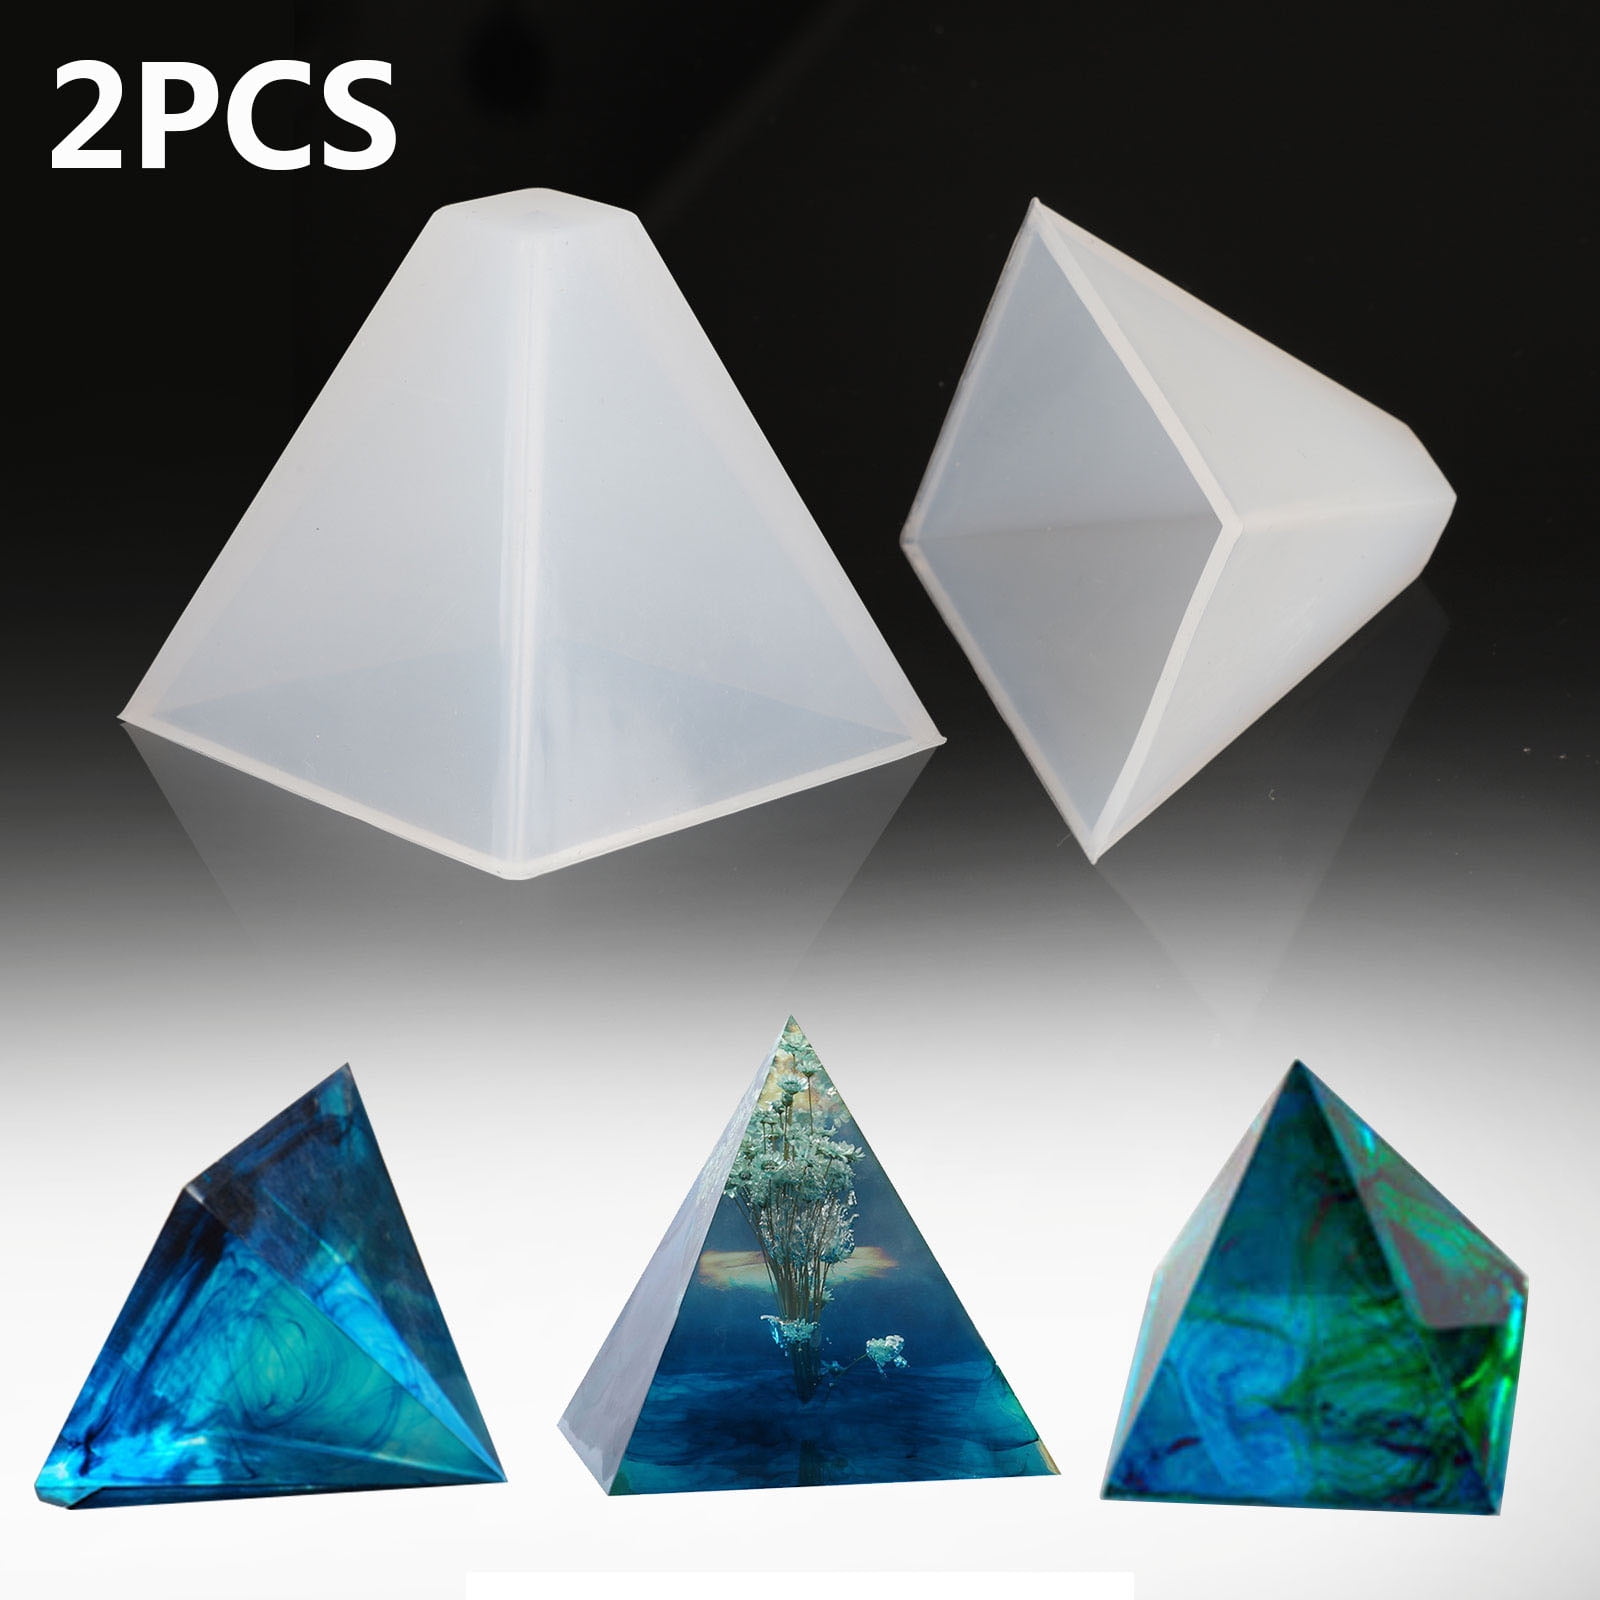 2 Size Pyramid DIY Silicone Mould Epoxy Resin Craft Jewelry Making Mold Tool